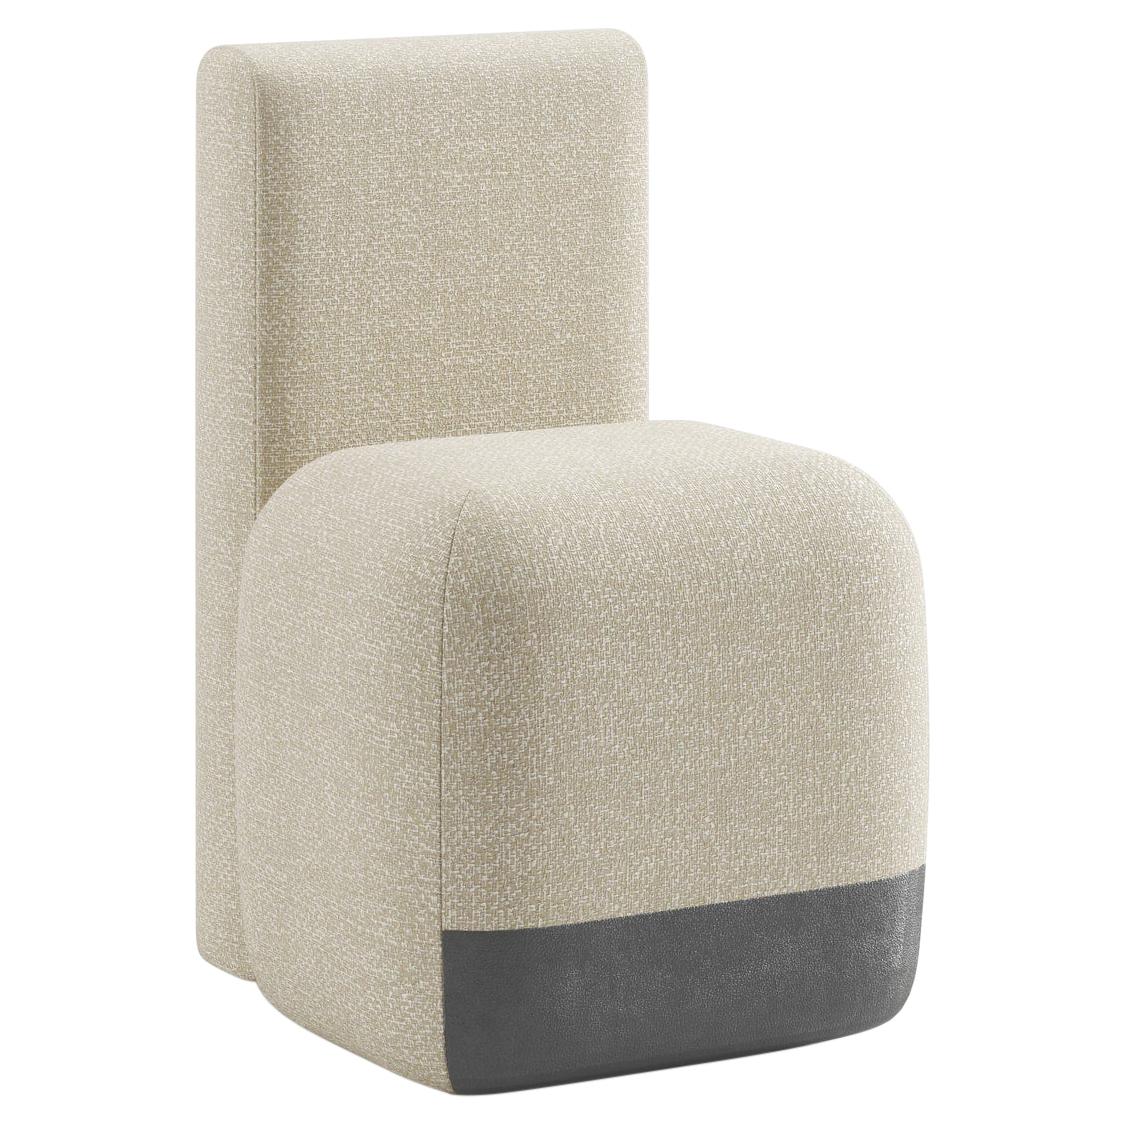 Viccarbe Season Chair by Piero Lissoni, in Fabric Crevin Gaudi 05 For Sale